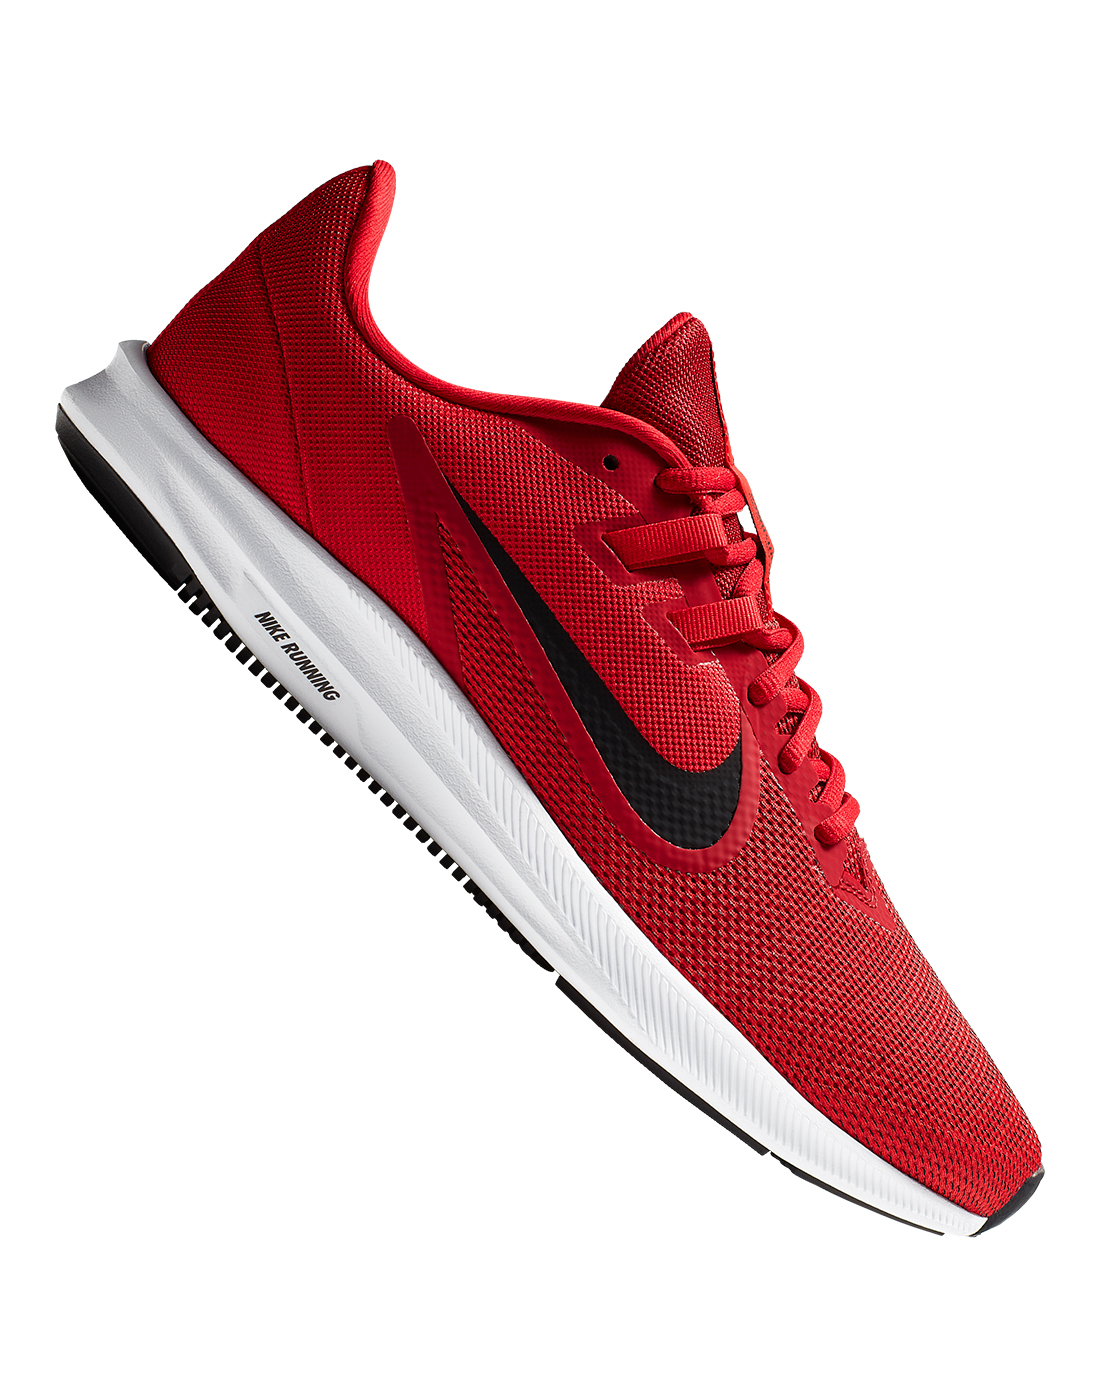 red nike running trainers